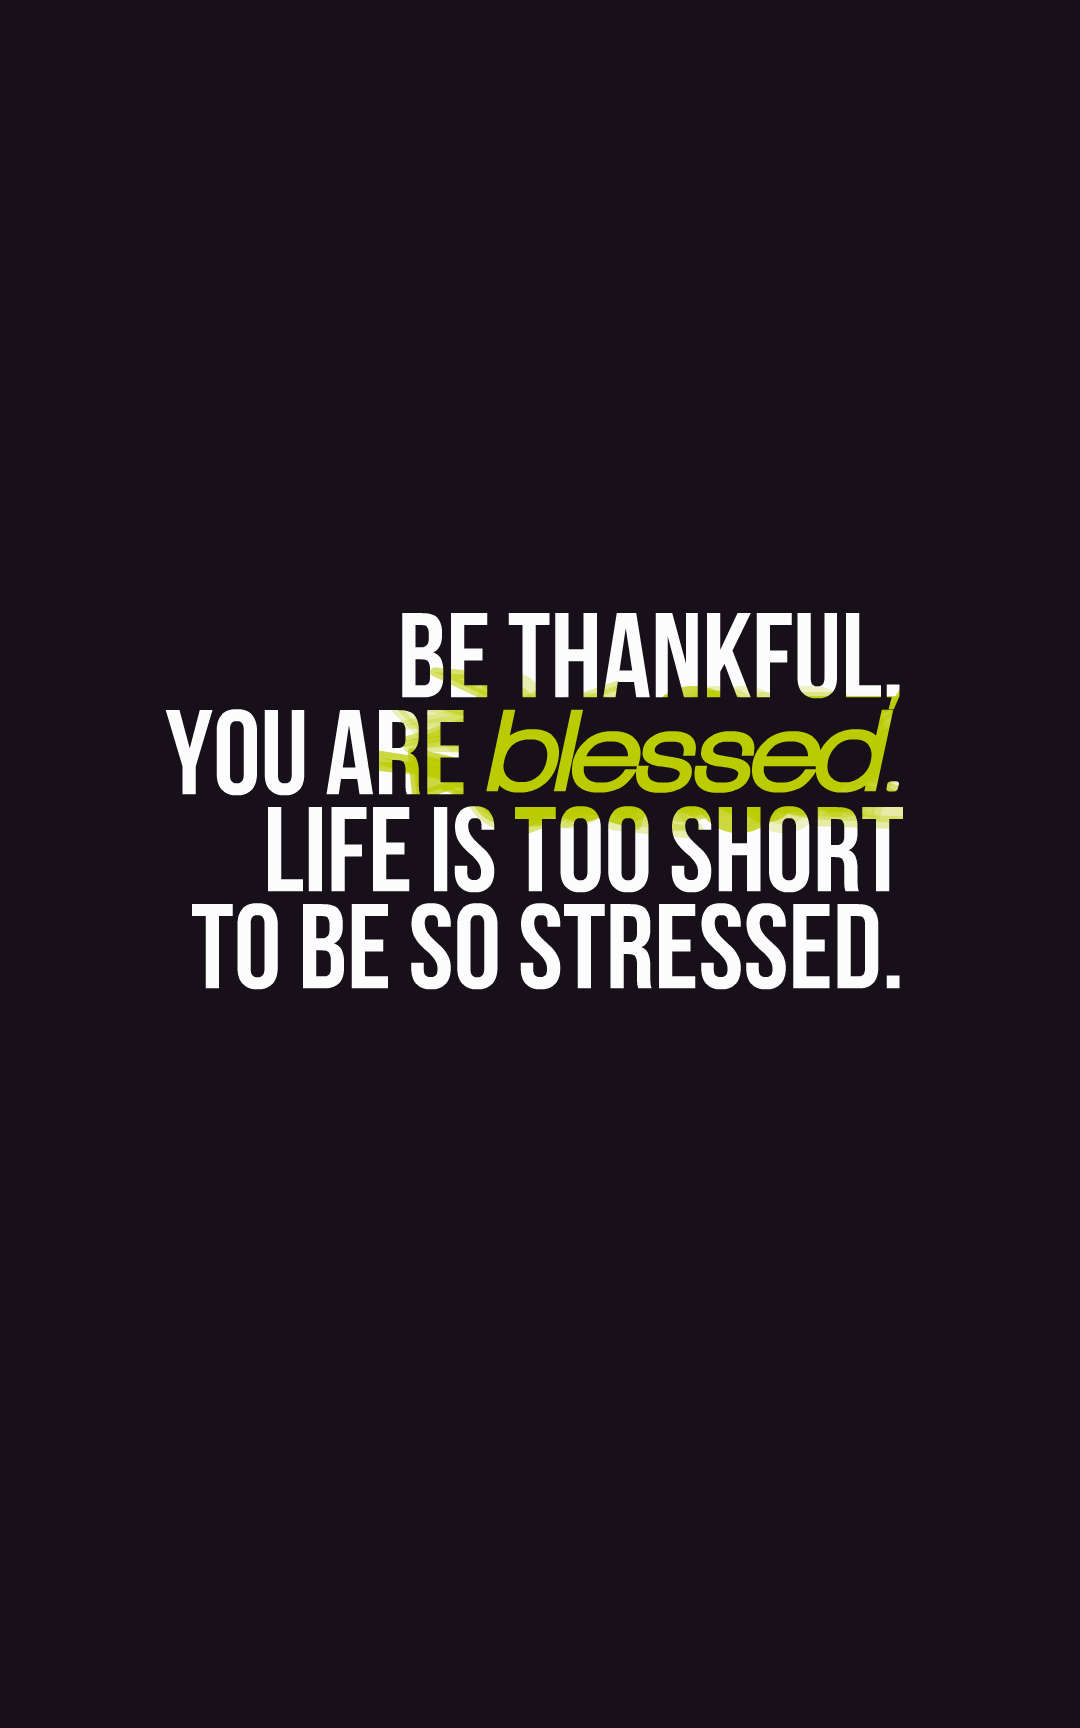 Be Thankful Quotes